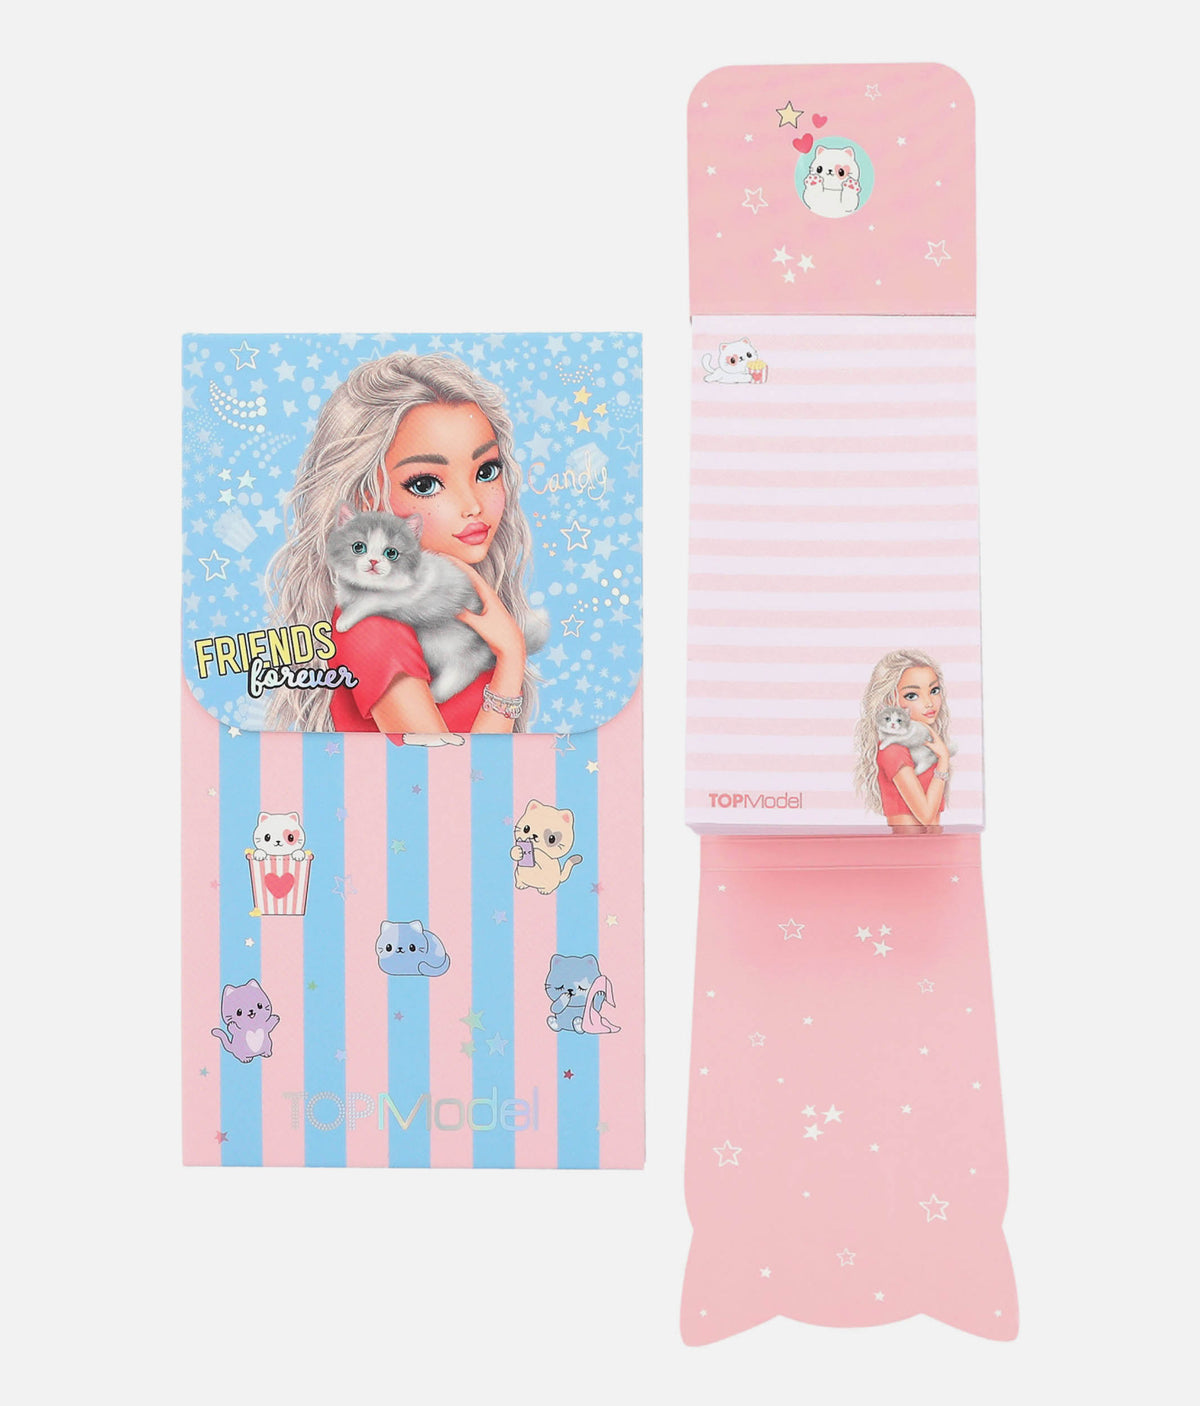 Note Pad With Magnet Closure CUTIE STAR - 0012439